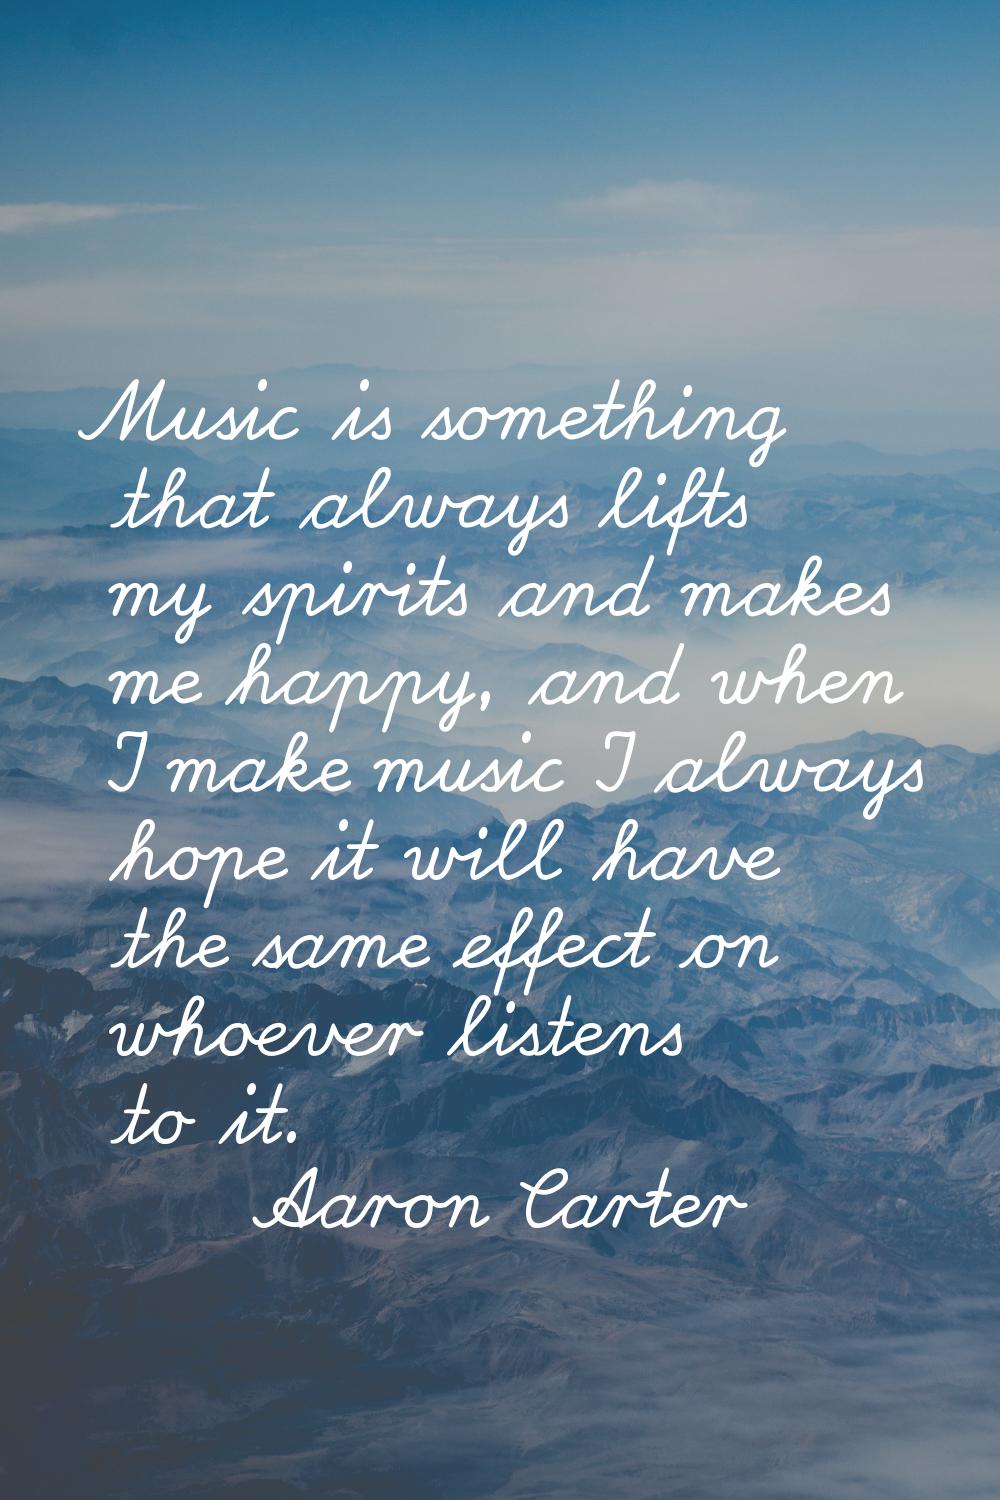 Music is something that always lifts my spirits and makes me happy, and when I make music I always 